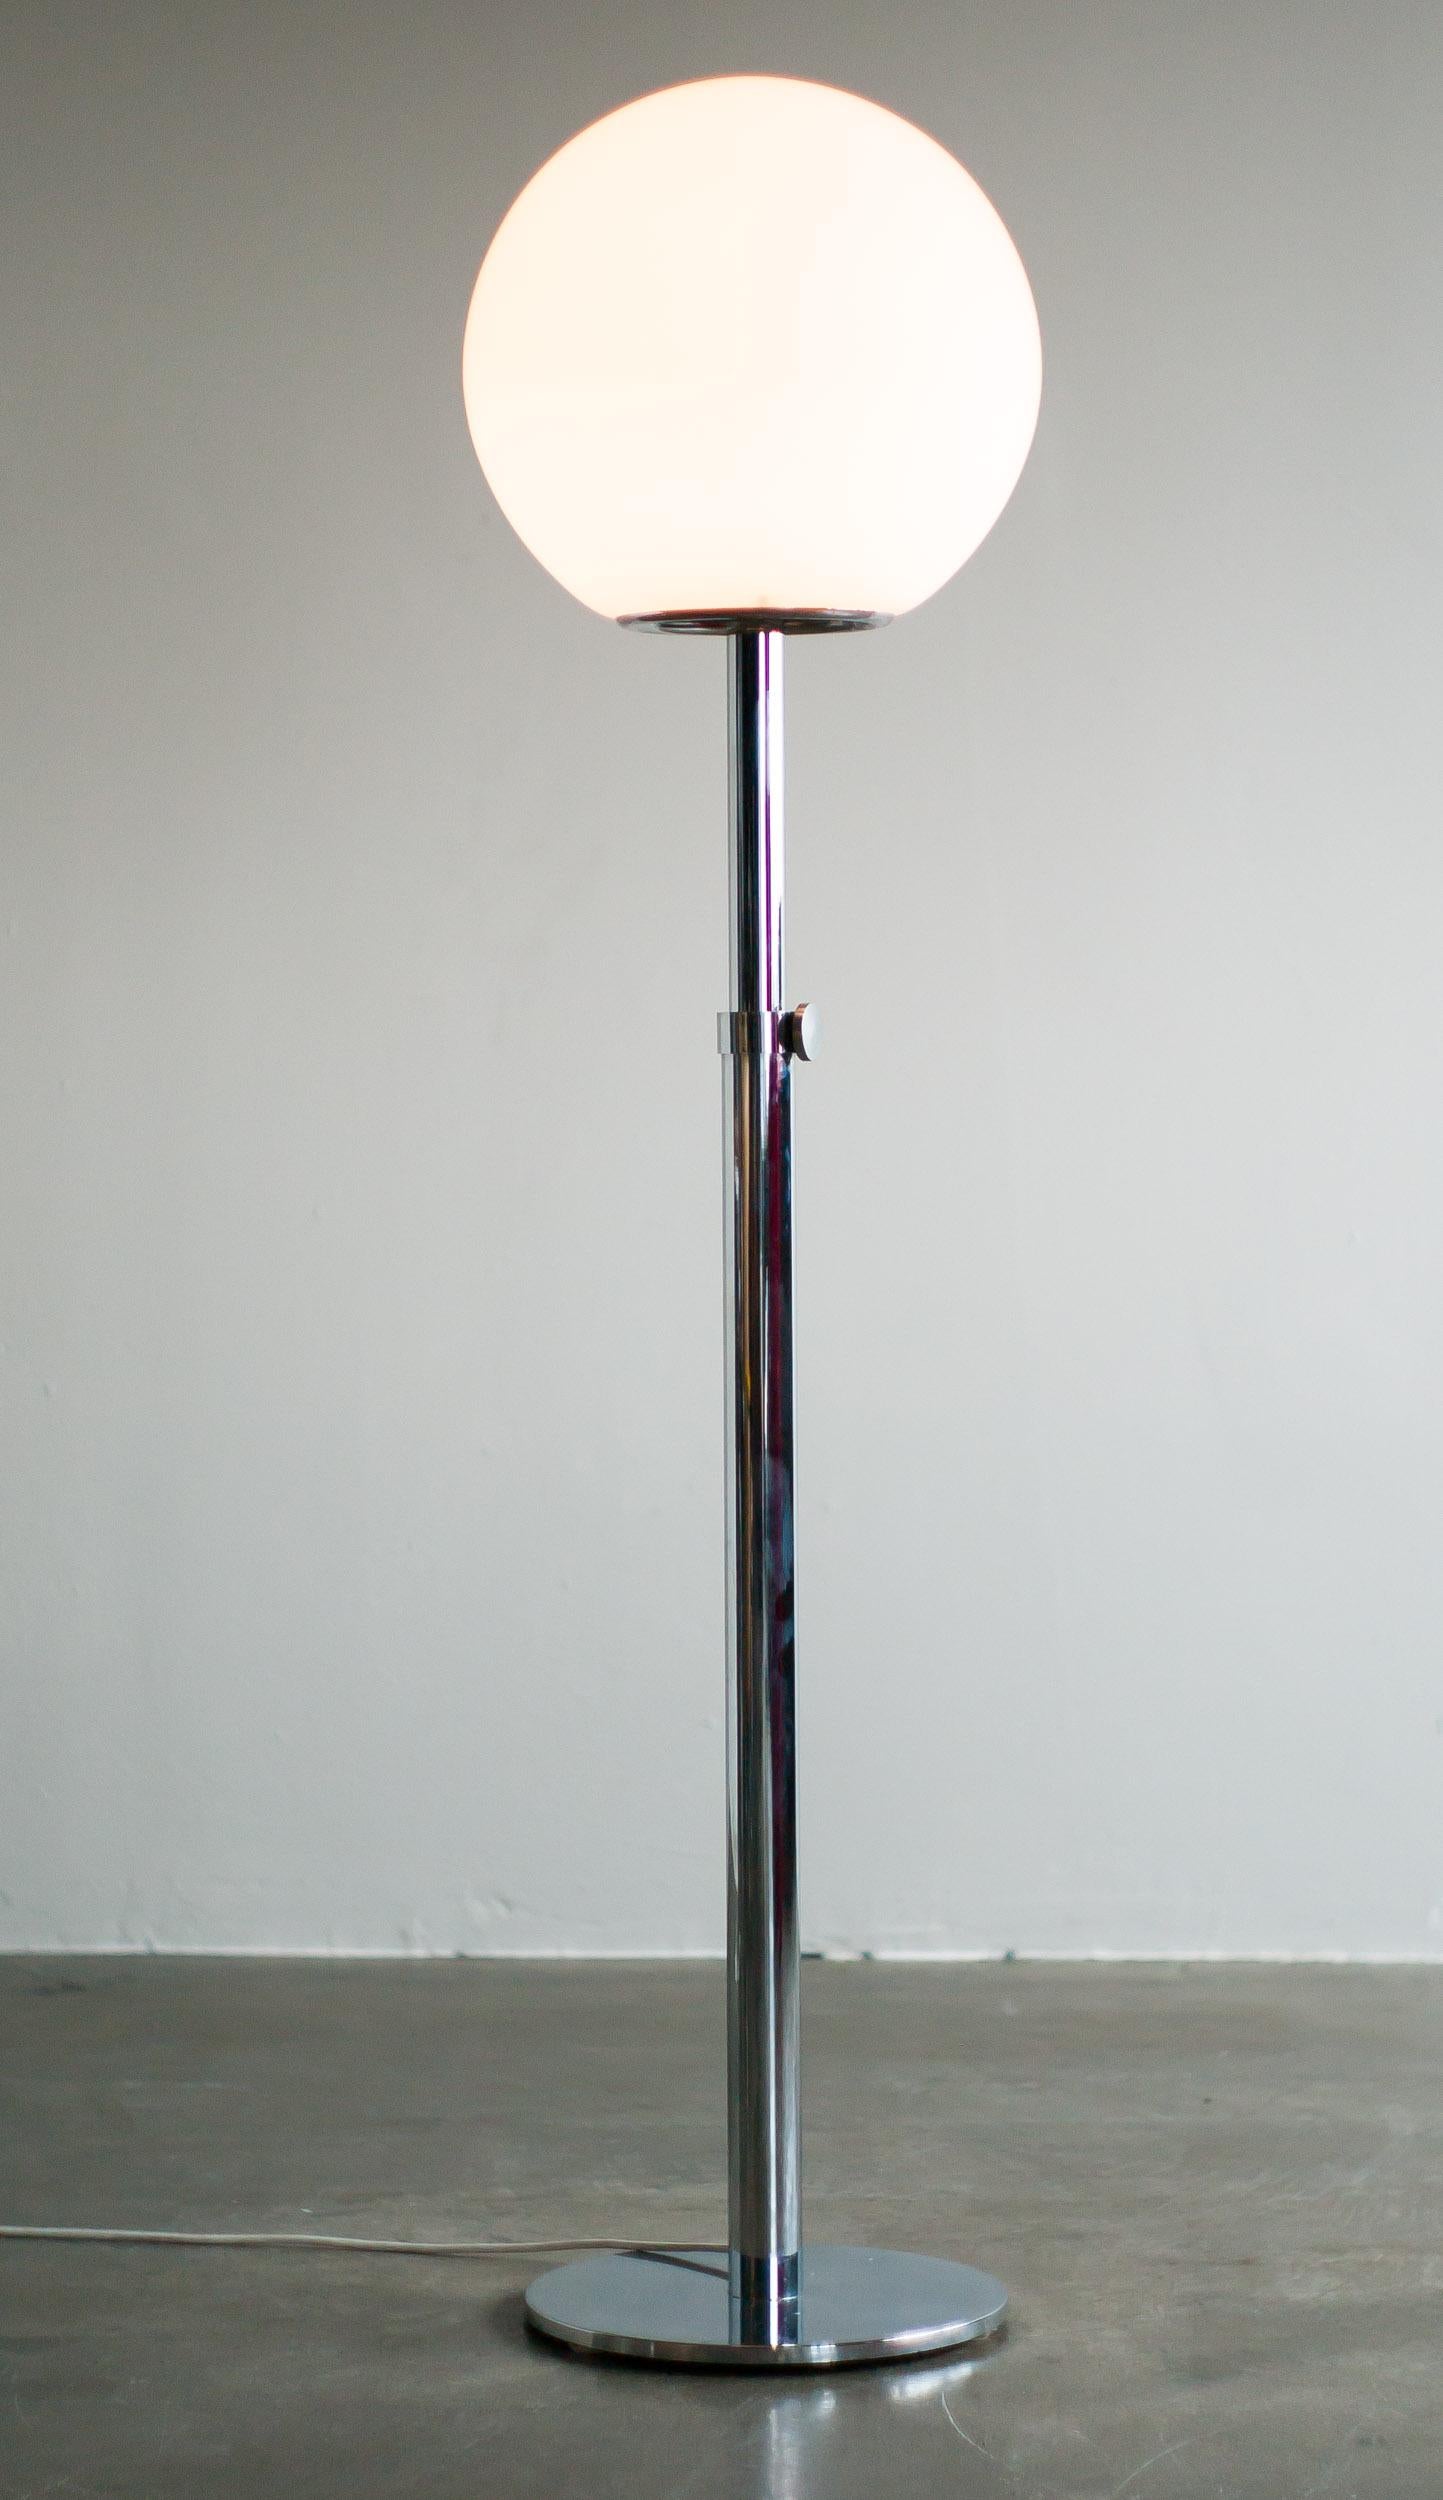 Height adjustable chrome floor lamp by Luci Illuminazione.
The opaline glass sphere creates a beautiful light.
Can be adjusted from 110 cm to 160 cm high.
 